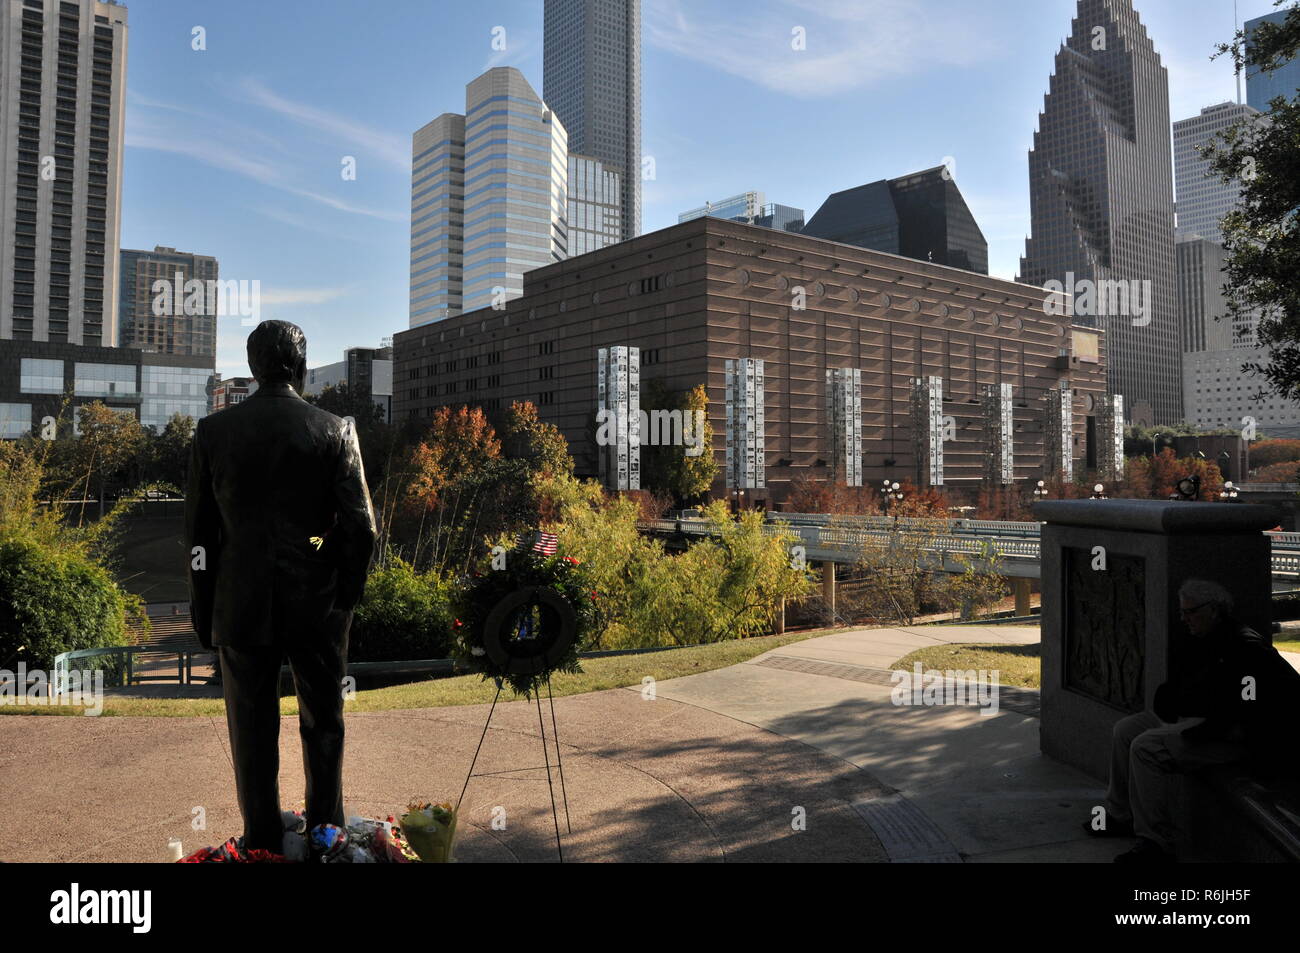 Houston, USA. 5th Dec, 2018. The statue of former U.S. President George H.W. Bush faces downtown Houston, Texas, the United States, on Dec. 5, 2018. The United States held a state funeral in Washington on Wednesday for the 41st President George H.W. Bush. Credit: Liu Liwei/Xinhua/Alamy Live News Stock Photo